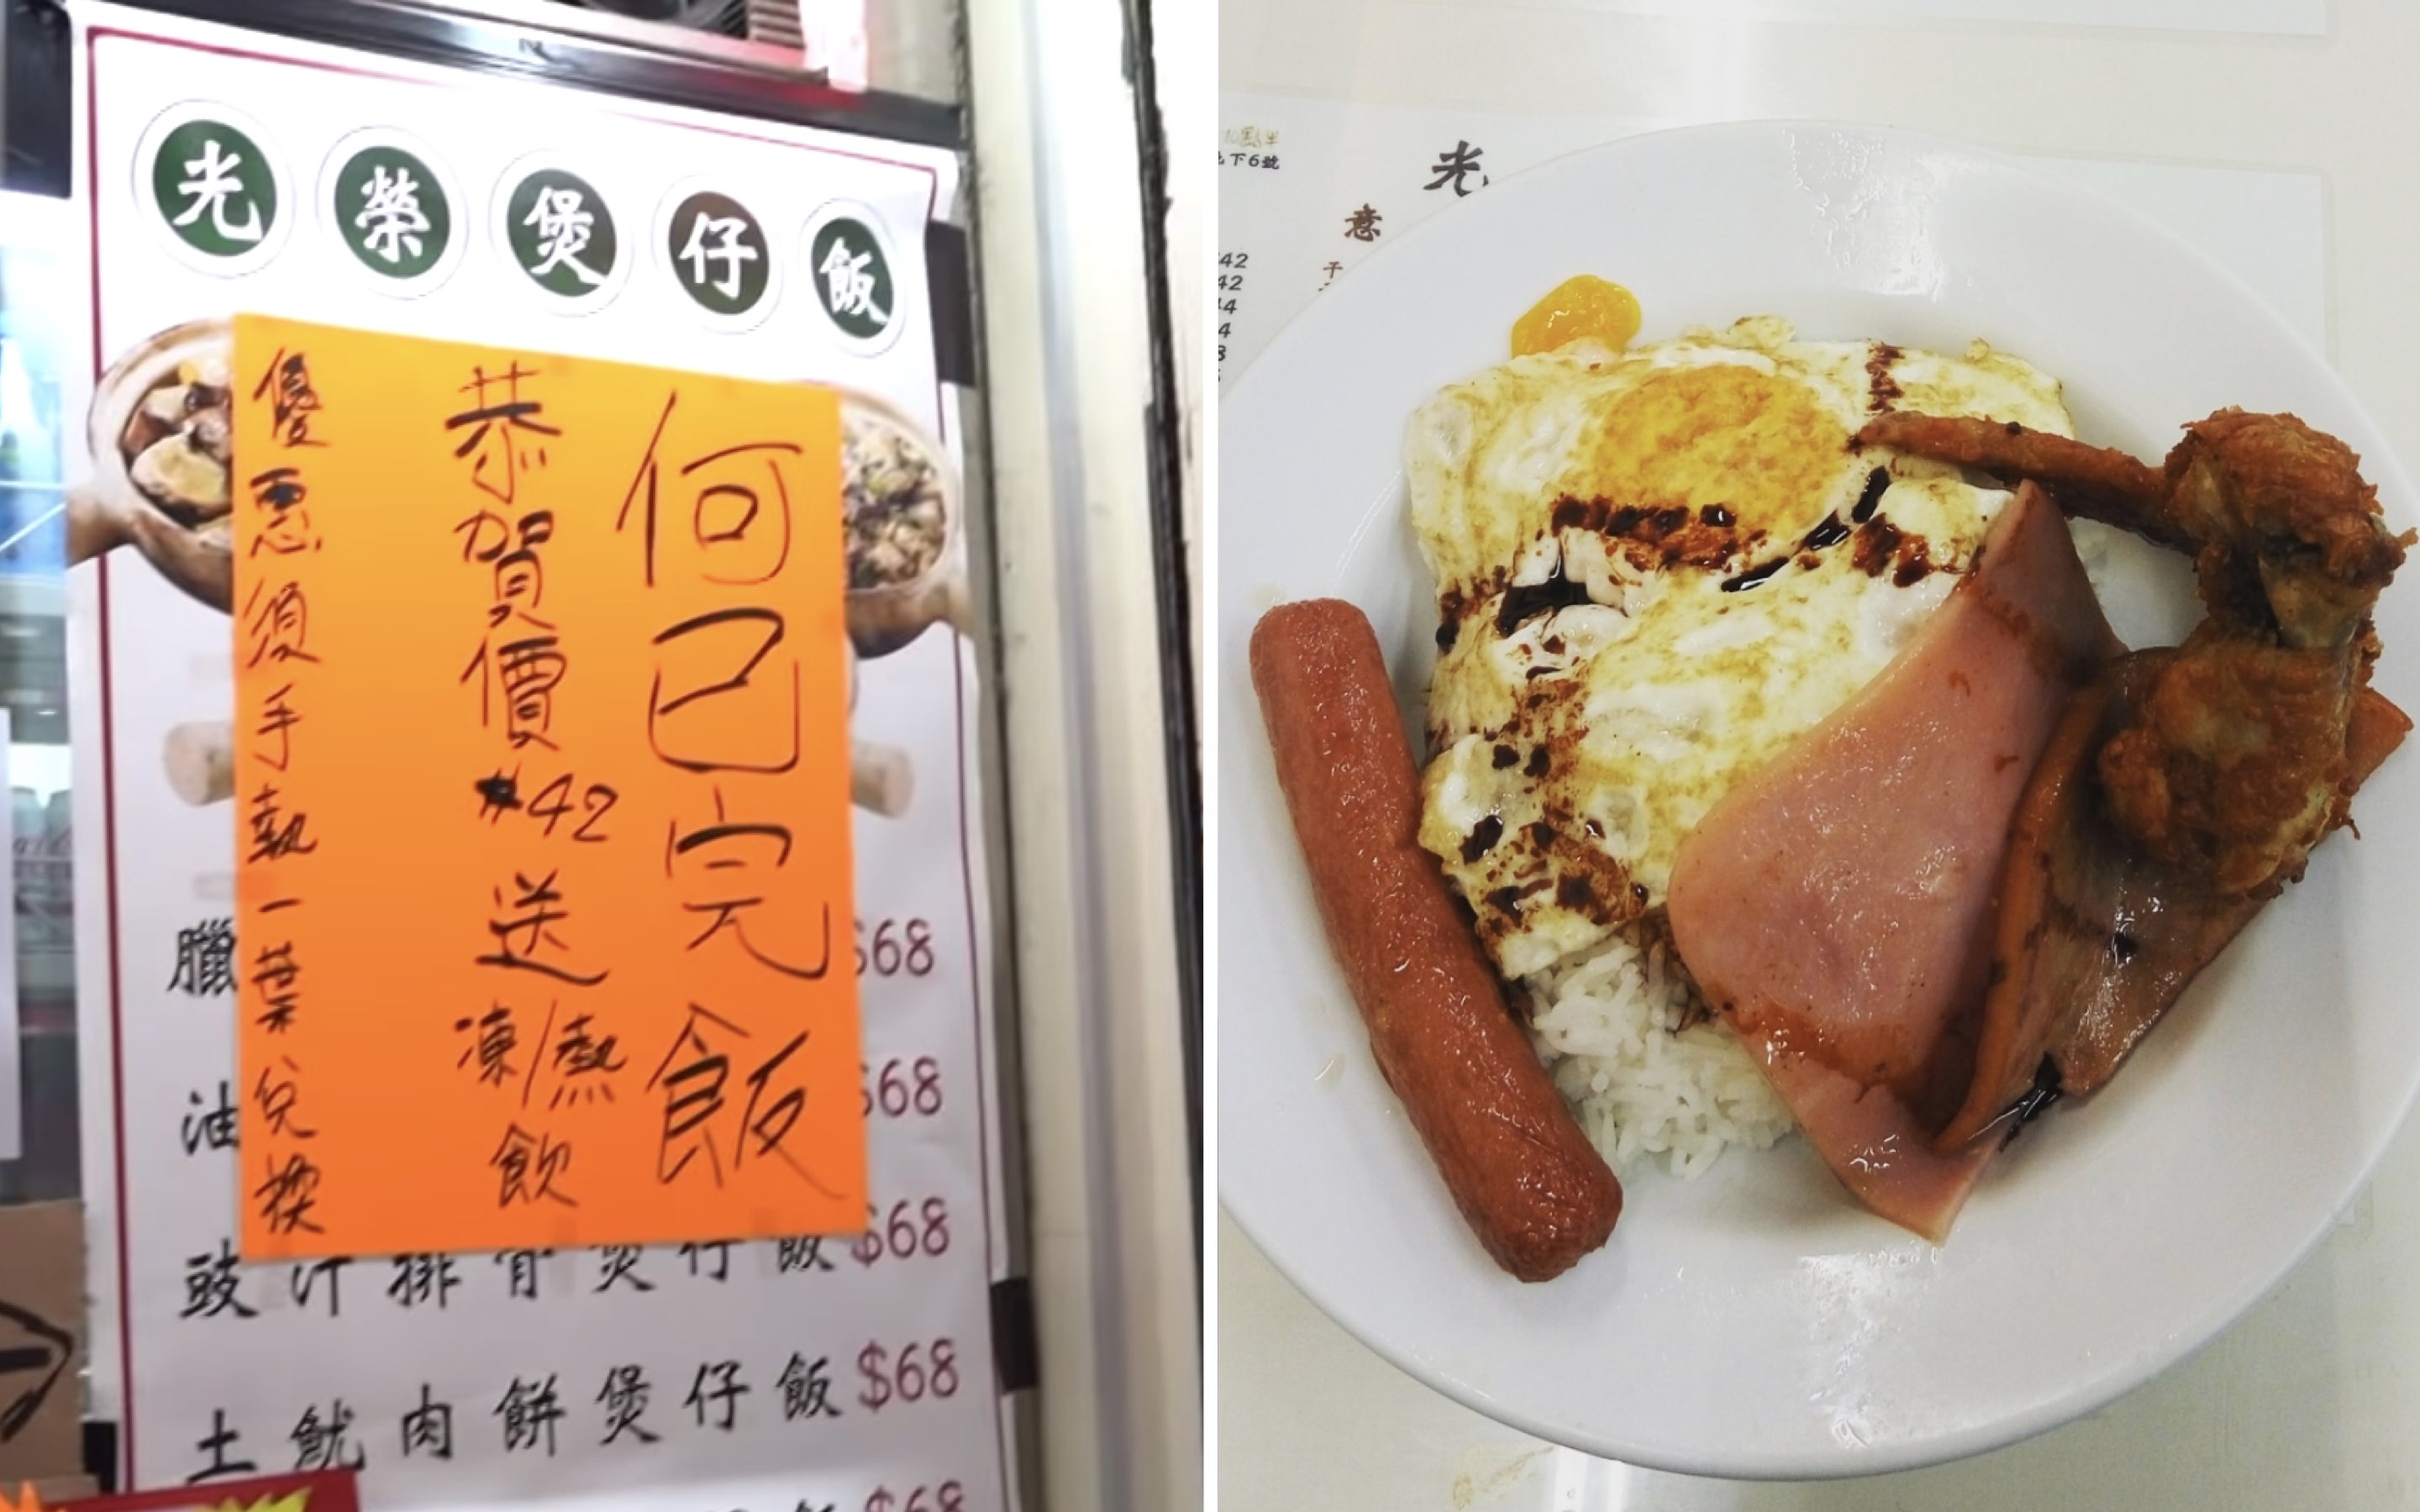 A restaurant in Tsim Sha Tsui is selling a ‘Ho’s finished’ meal to celebrate lawmaker Junius Ho’s defeat at the recent district council elections. Screengrabs and photos via YouTube and Instagram/vincentcmf.